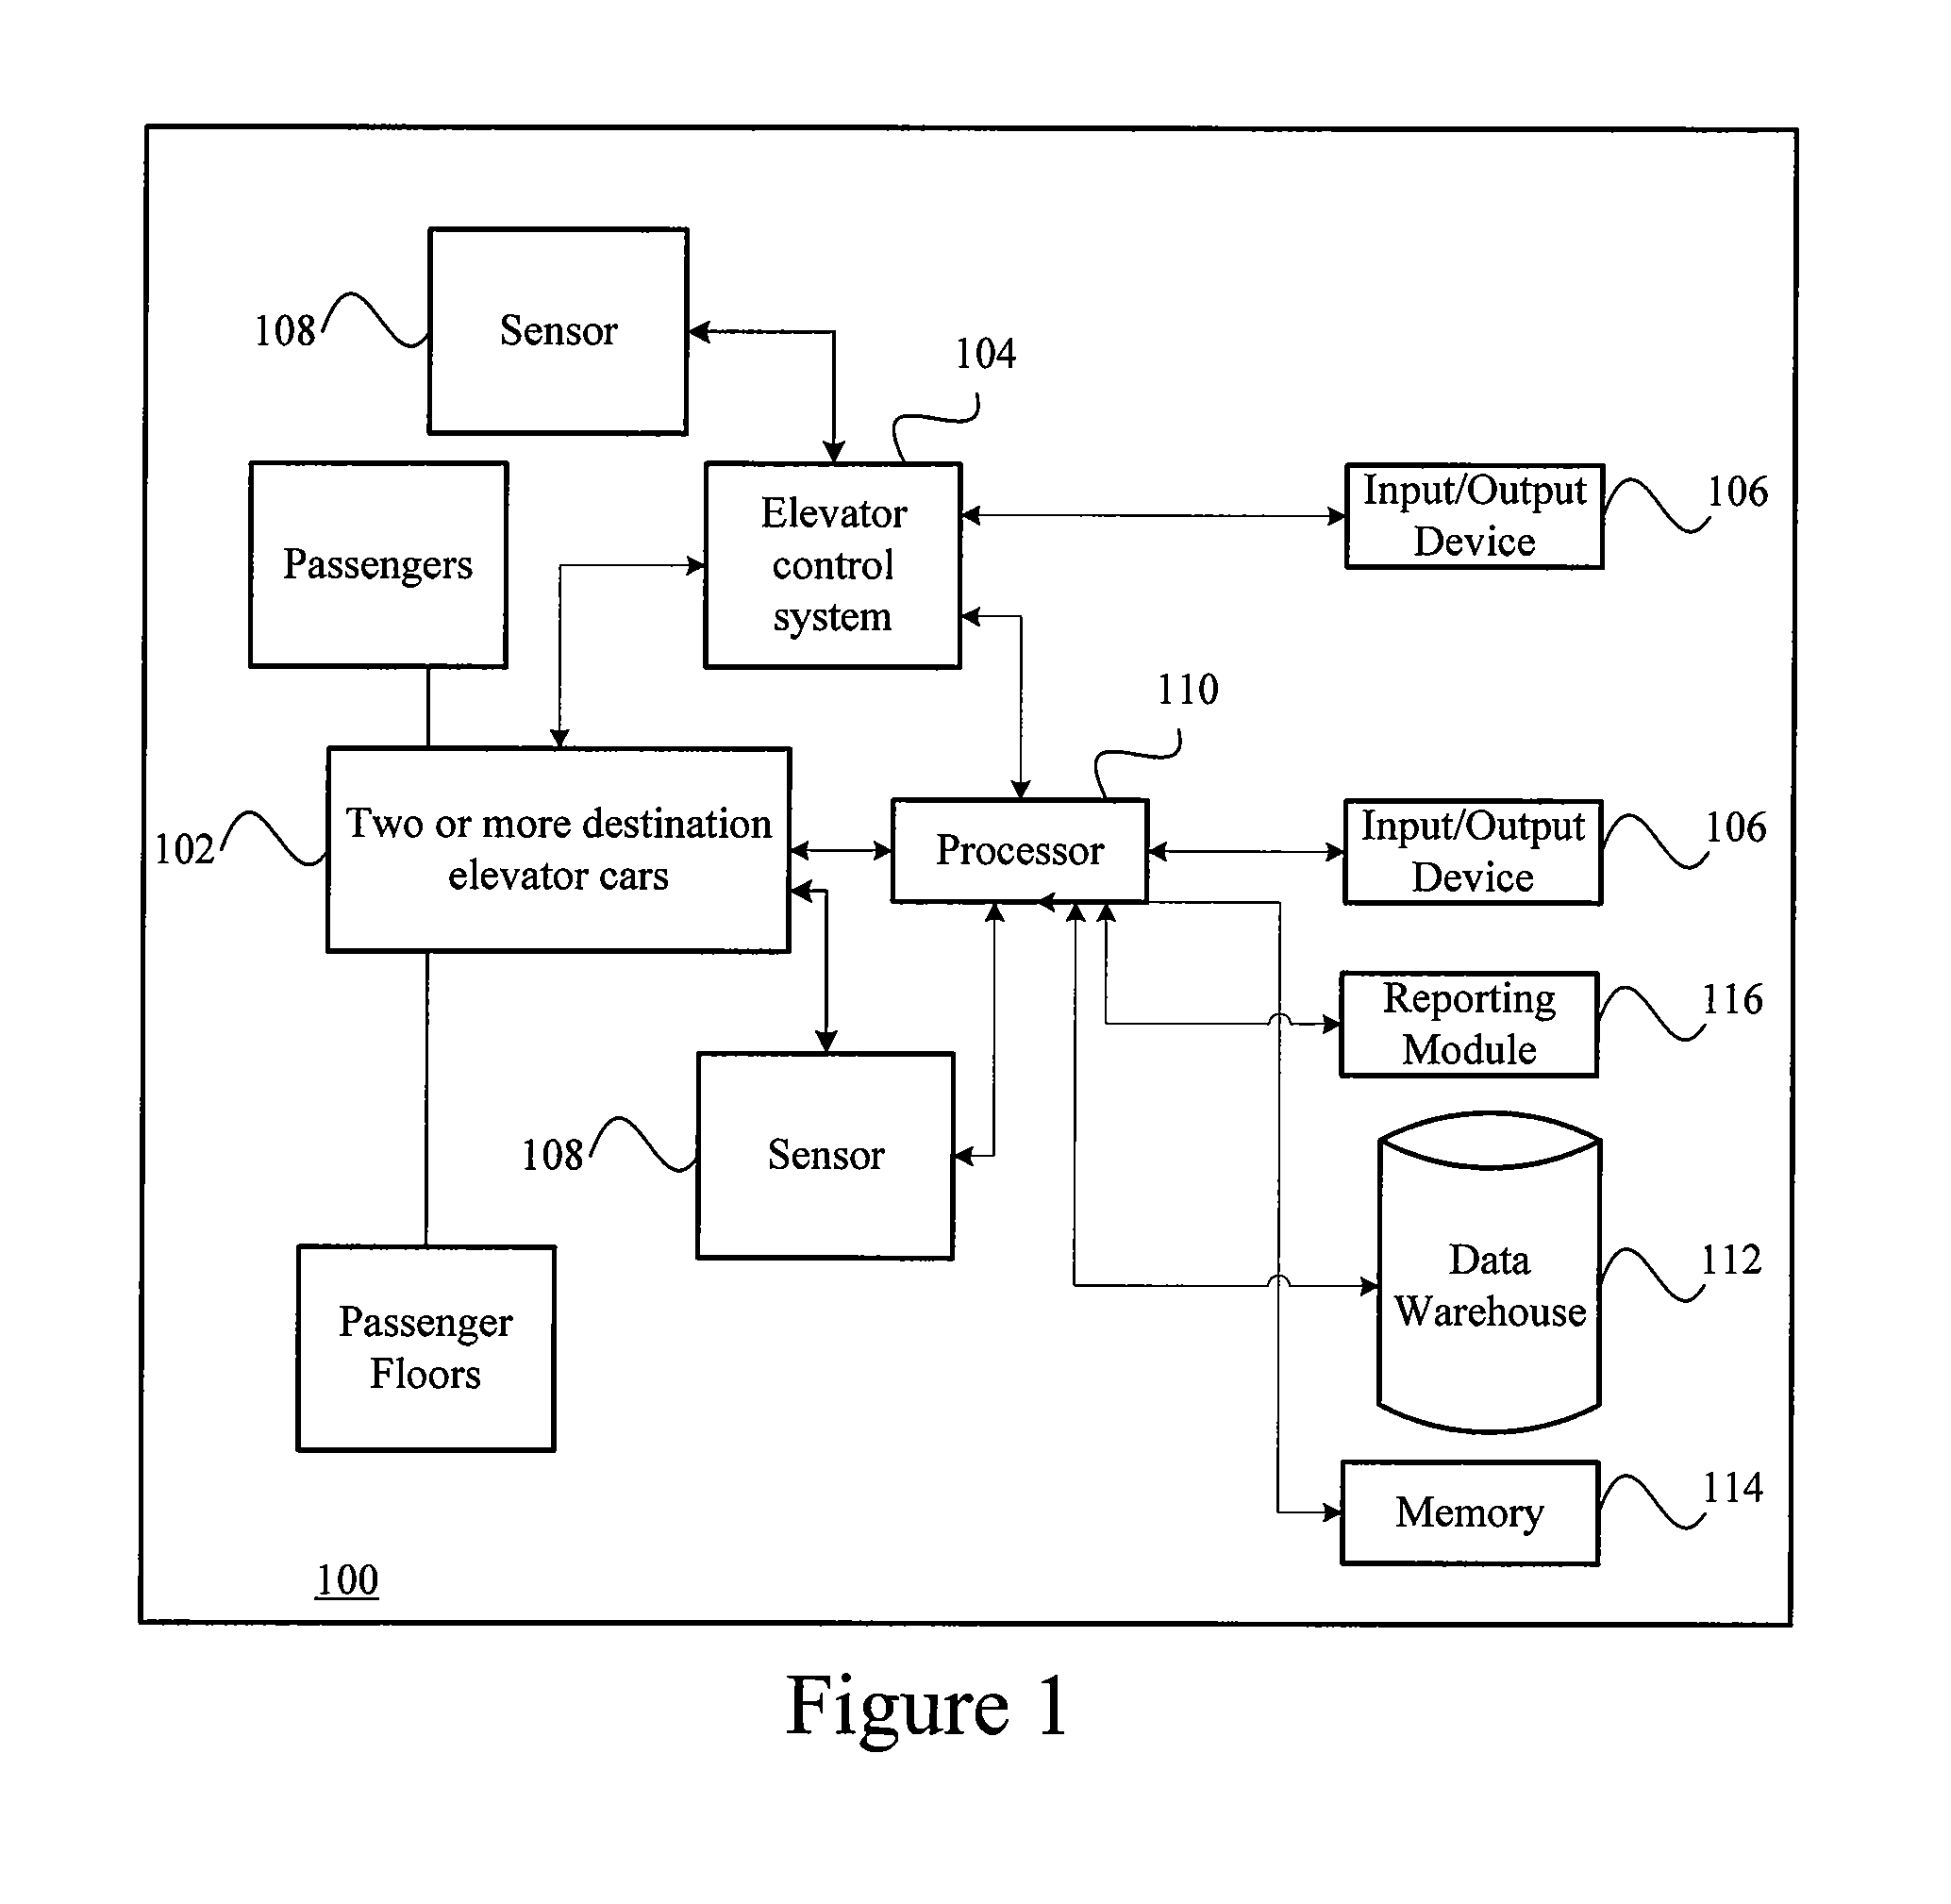 Method of controlling intelligent destination elevators with selected operation modes